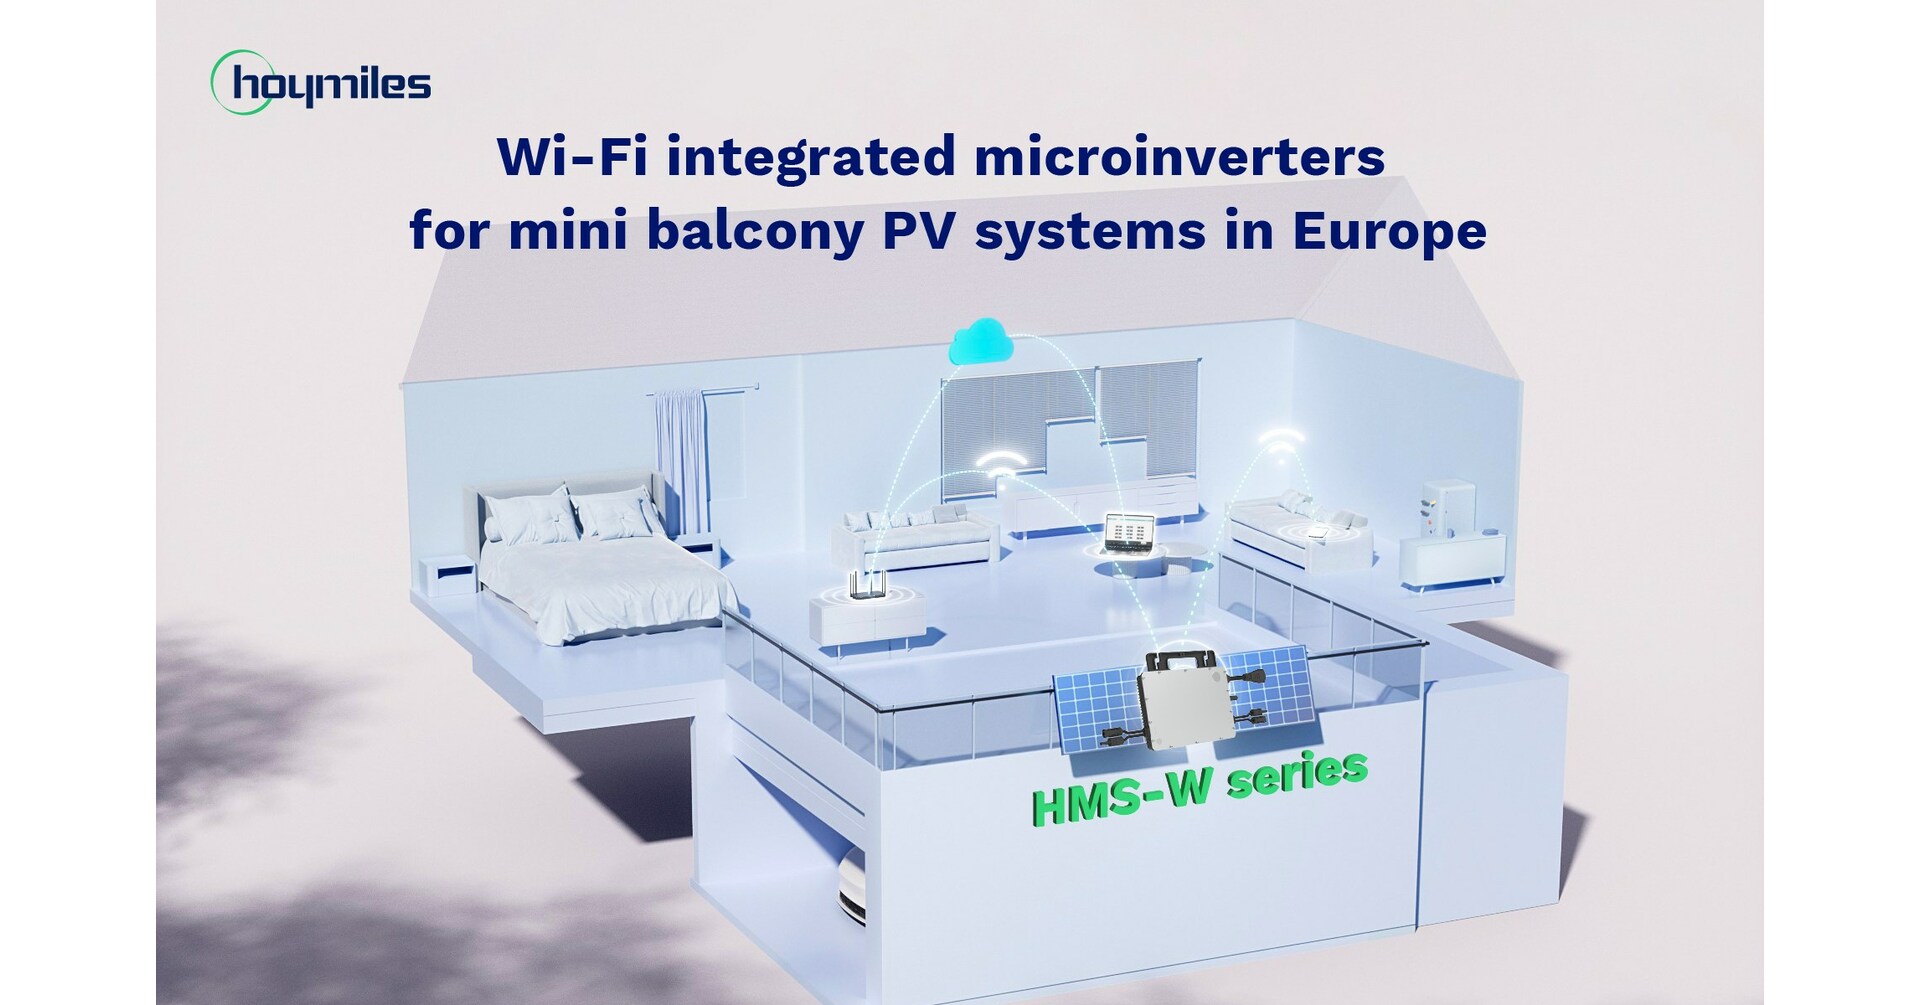 Hoymiles launches Wi-Fi integrated microinverters in Europe for